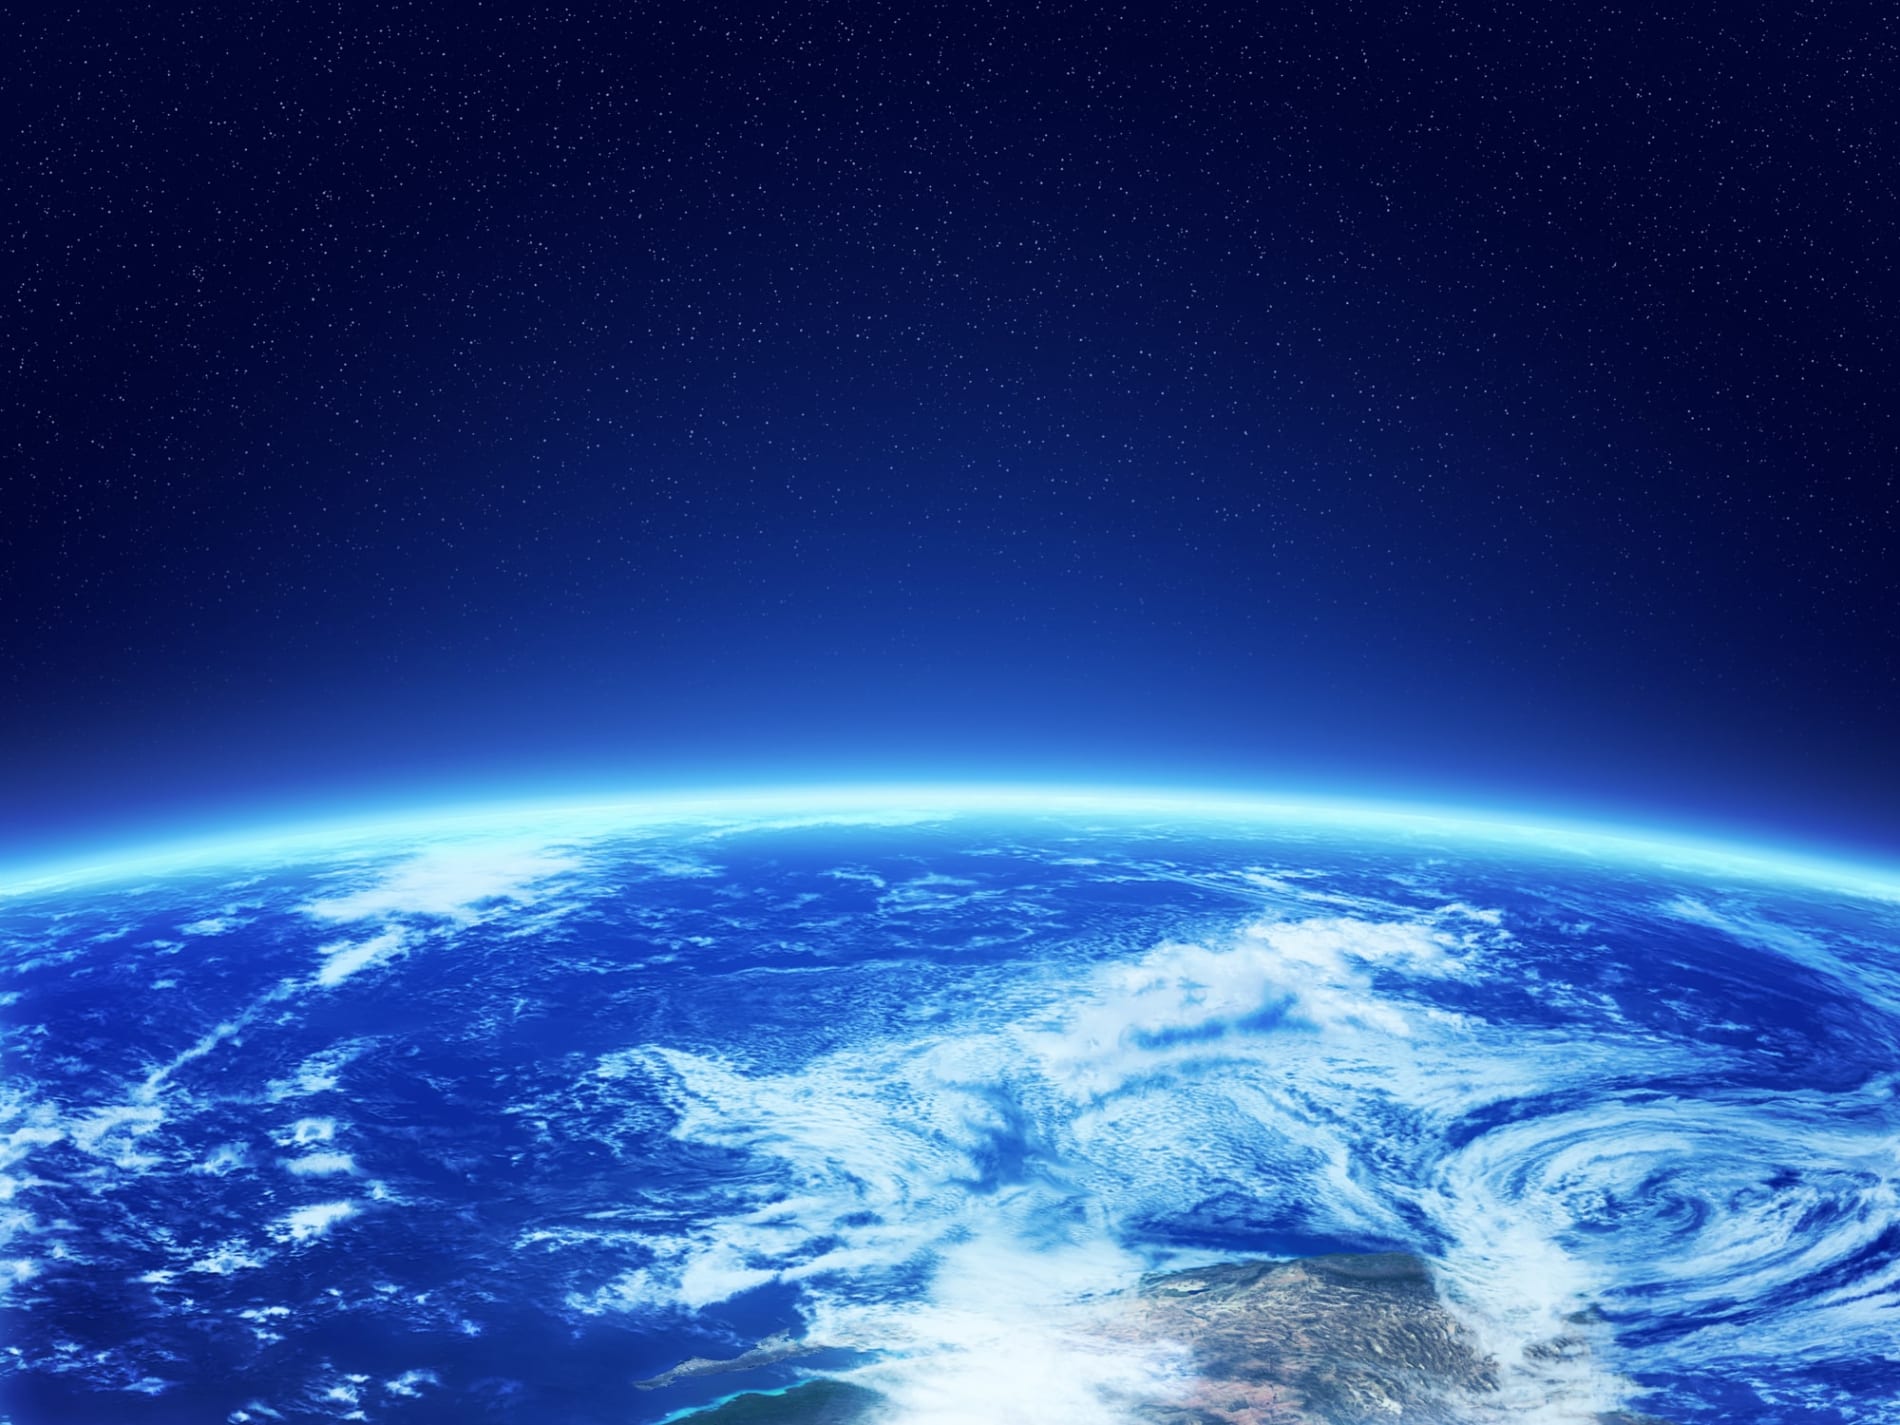 Earth as shown from space